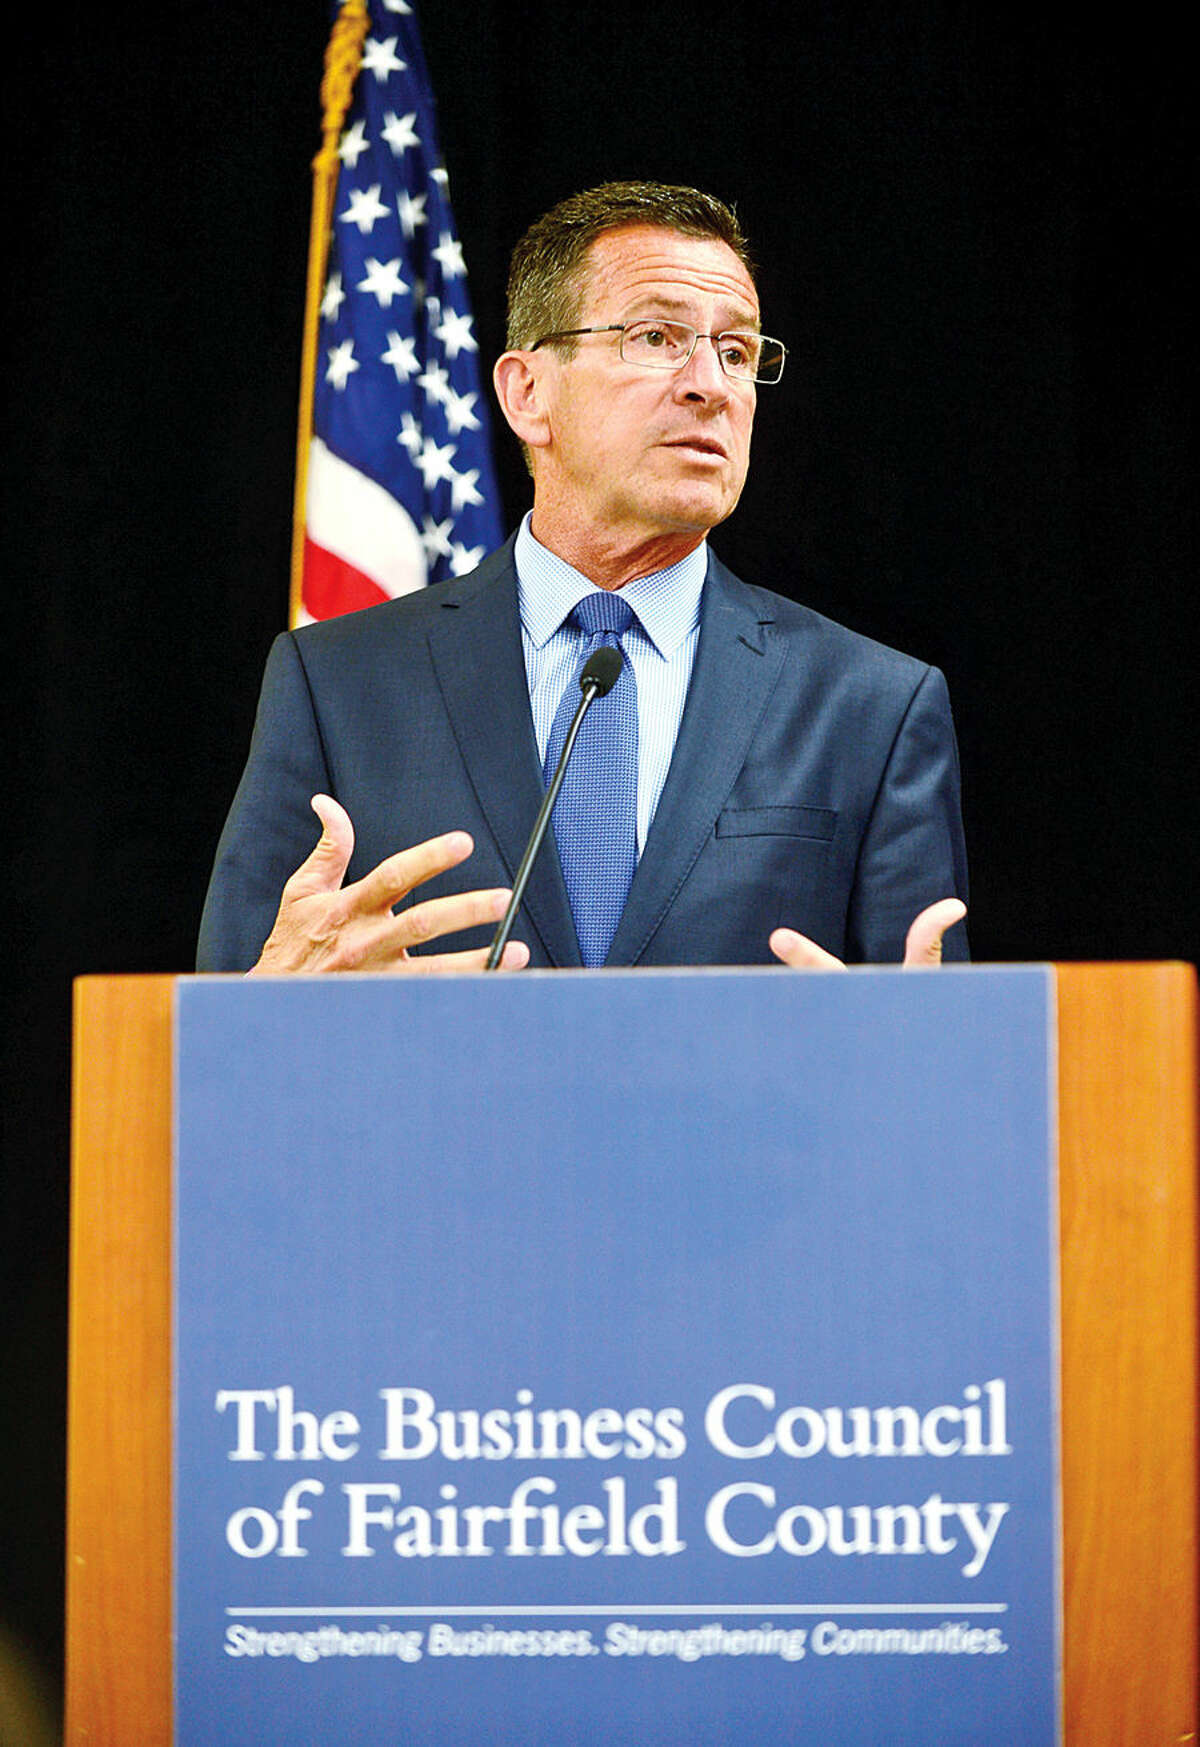 In this file photo, Gov. Dannel P. Malloy, the keynote speaker at The Business Council of Fairfield County’s 45th Annual Members’ Luncheon, speaks about his administration's top agenda items, including creating jobs and making long-overdue investments in the state's transportation infrastructure at the Stamford Sheraton Wednesday.